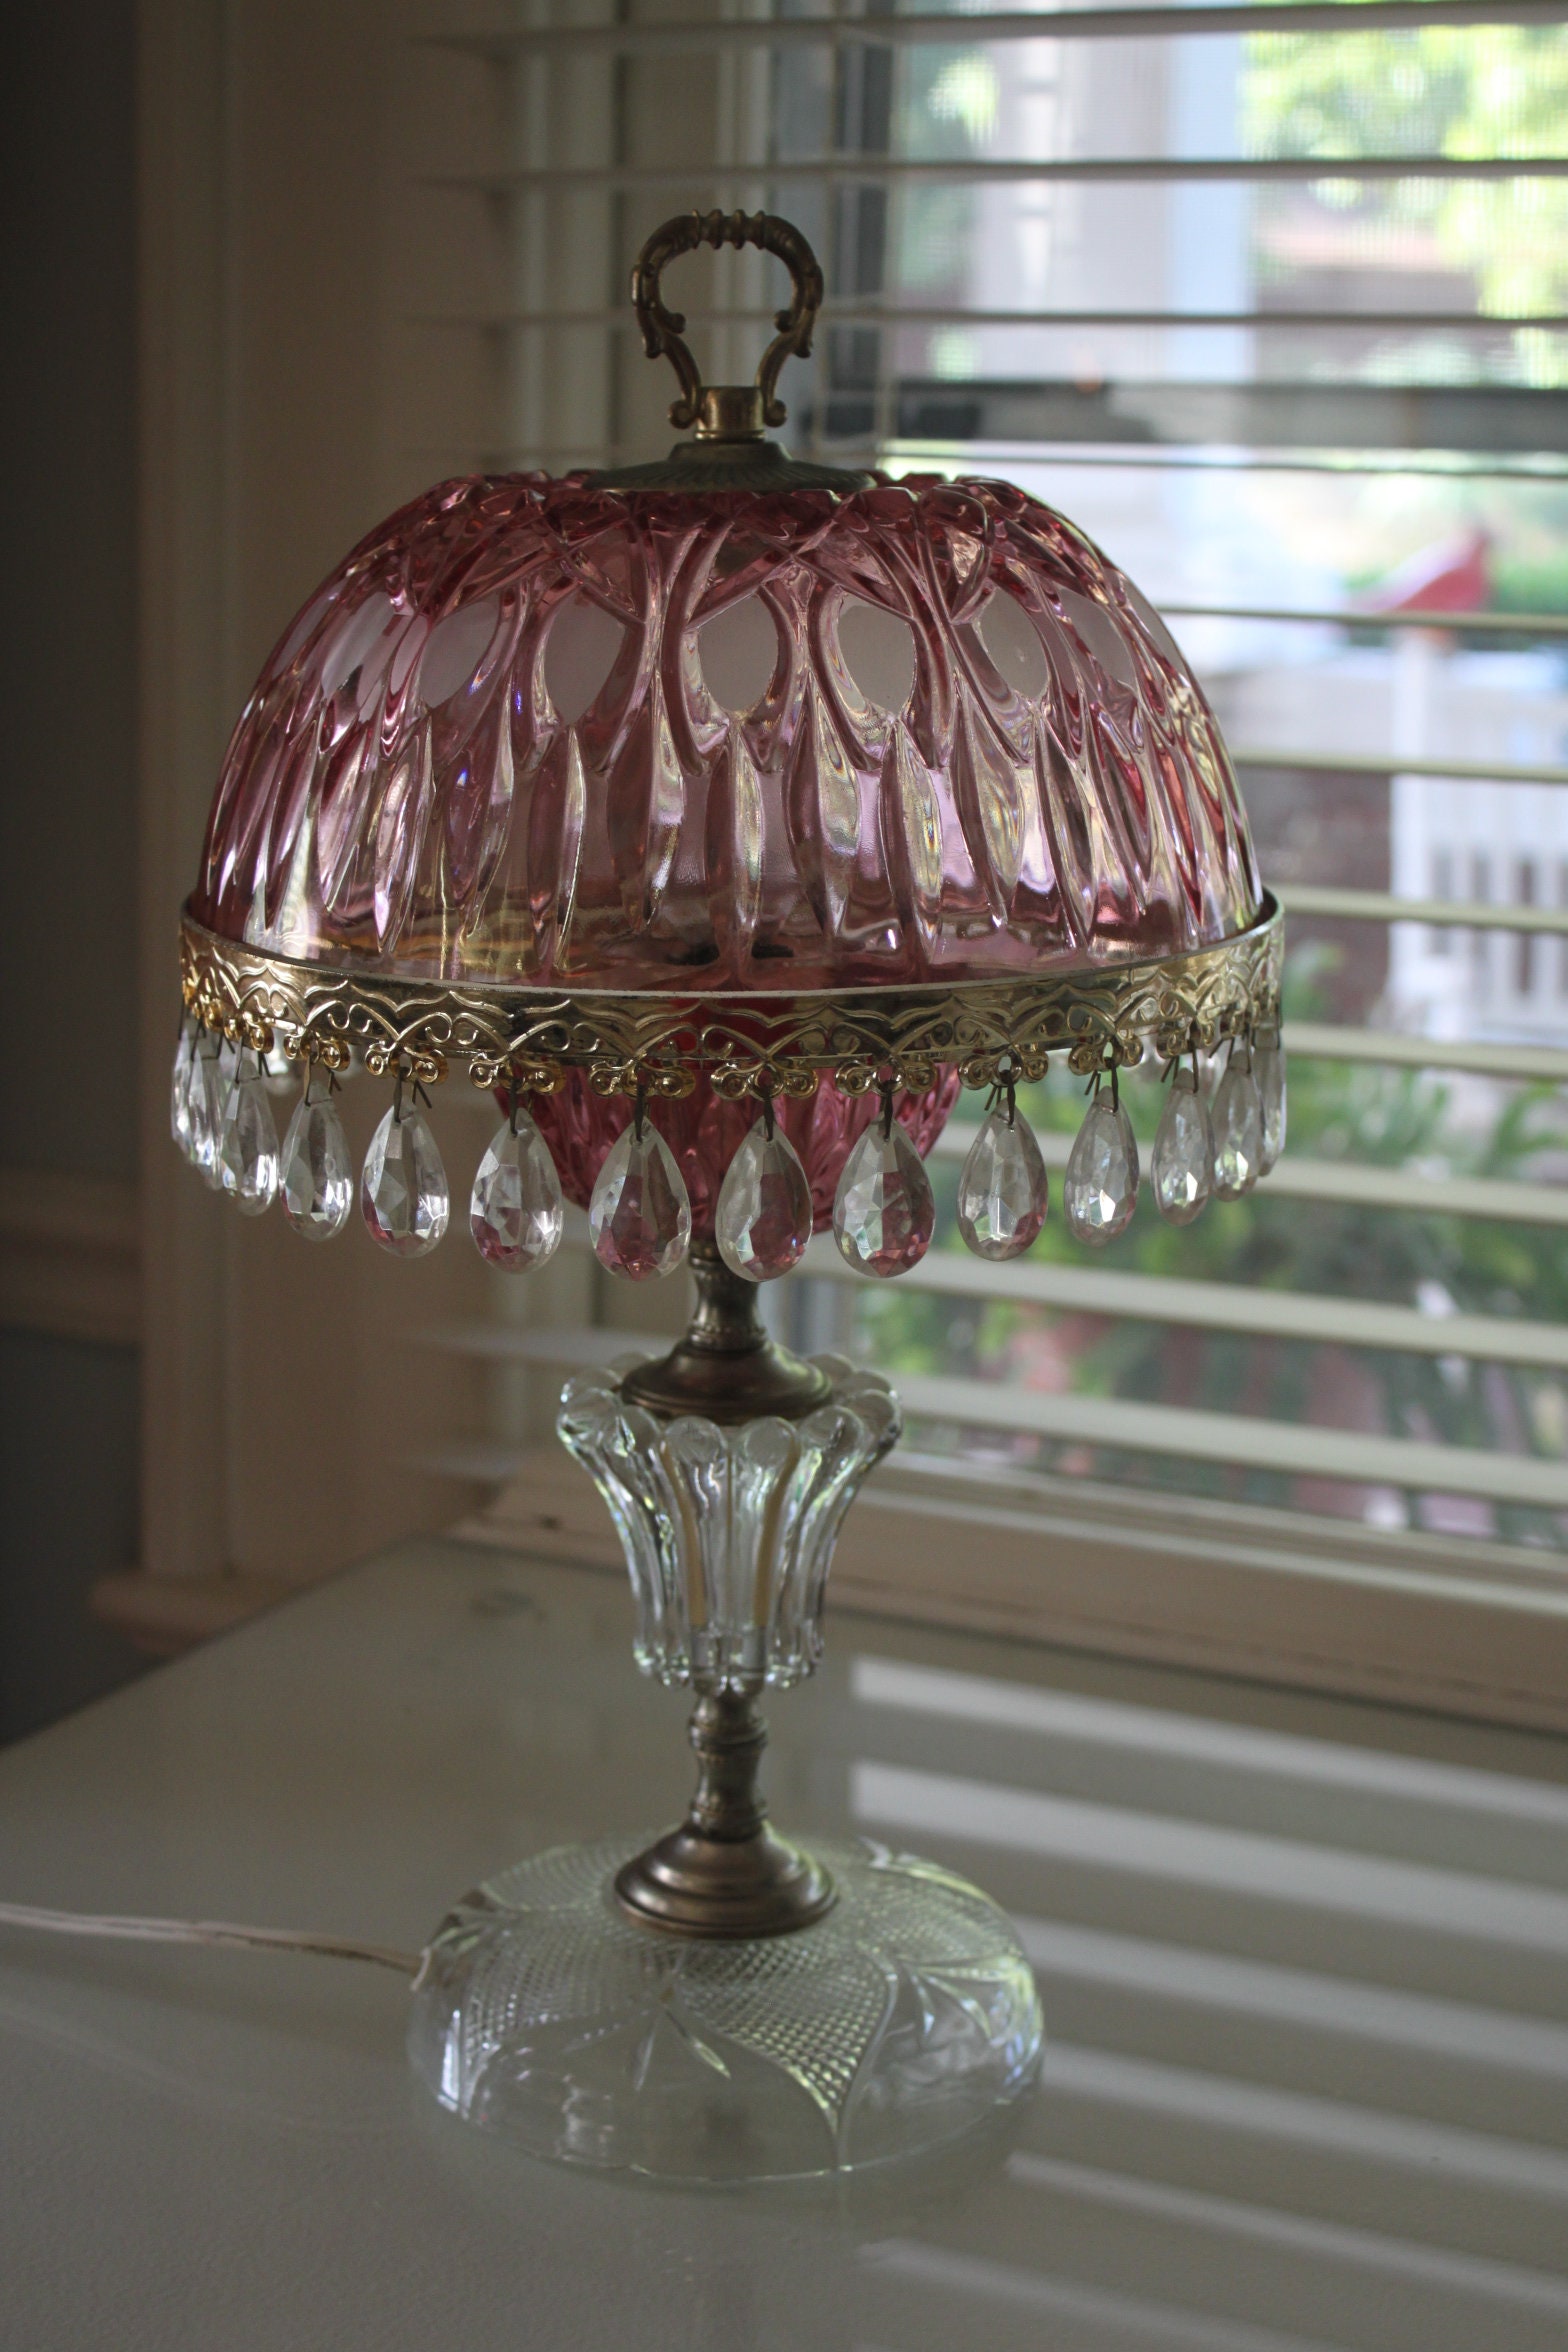 Working Vintage Crystal Glass Prism Rose Boudoir 14 Table Lamp Made in